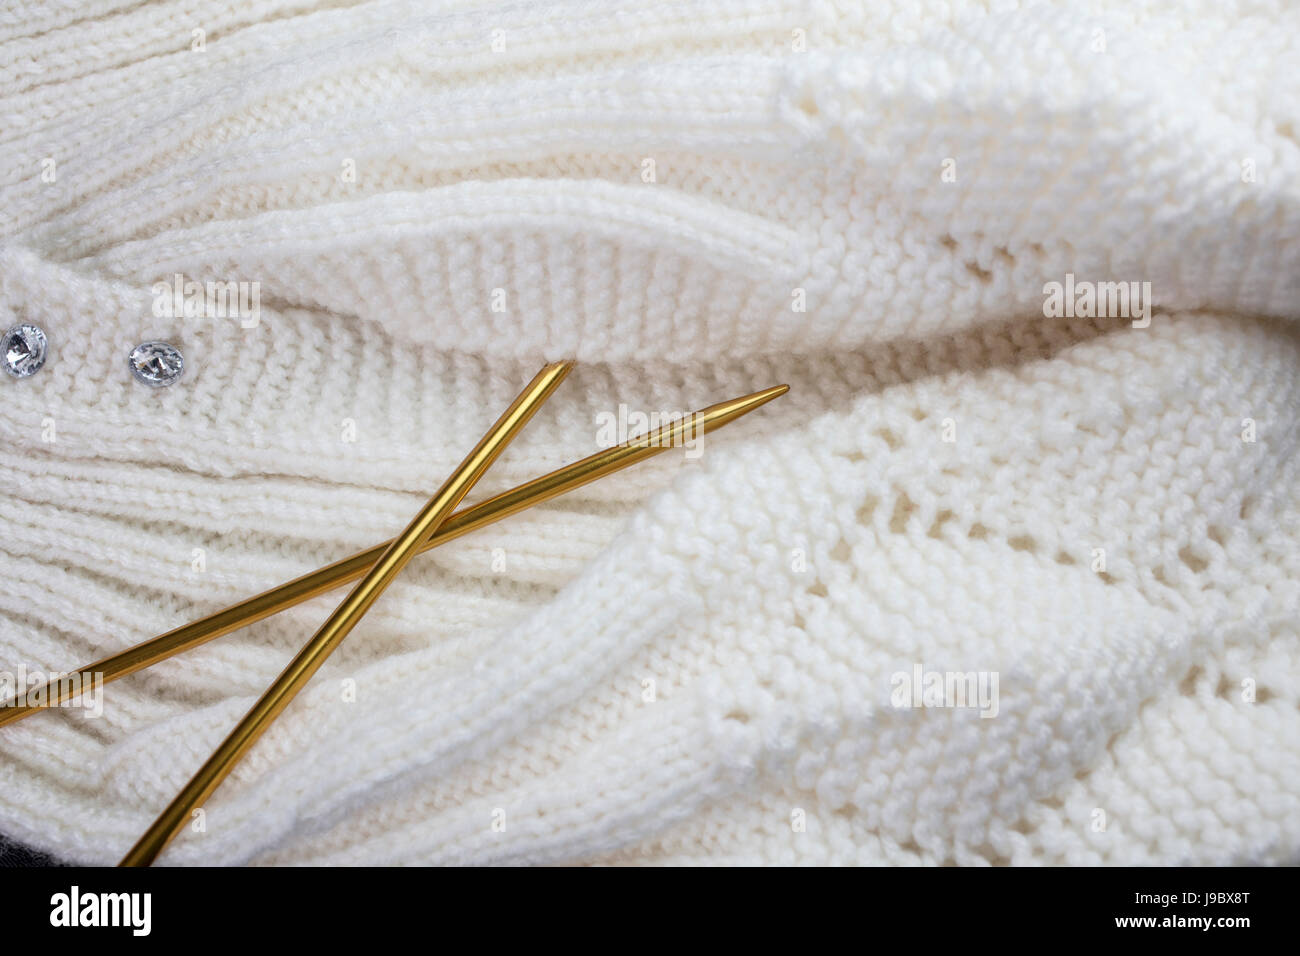 White yarn knitted garment with gold colored knitting needles Stock Photo